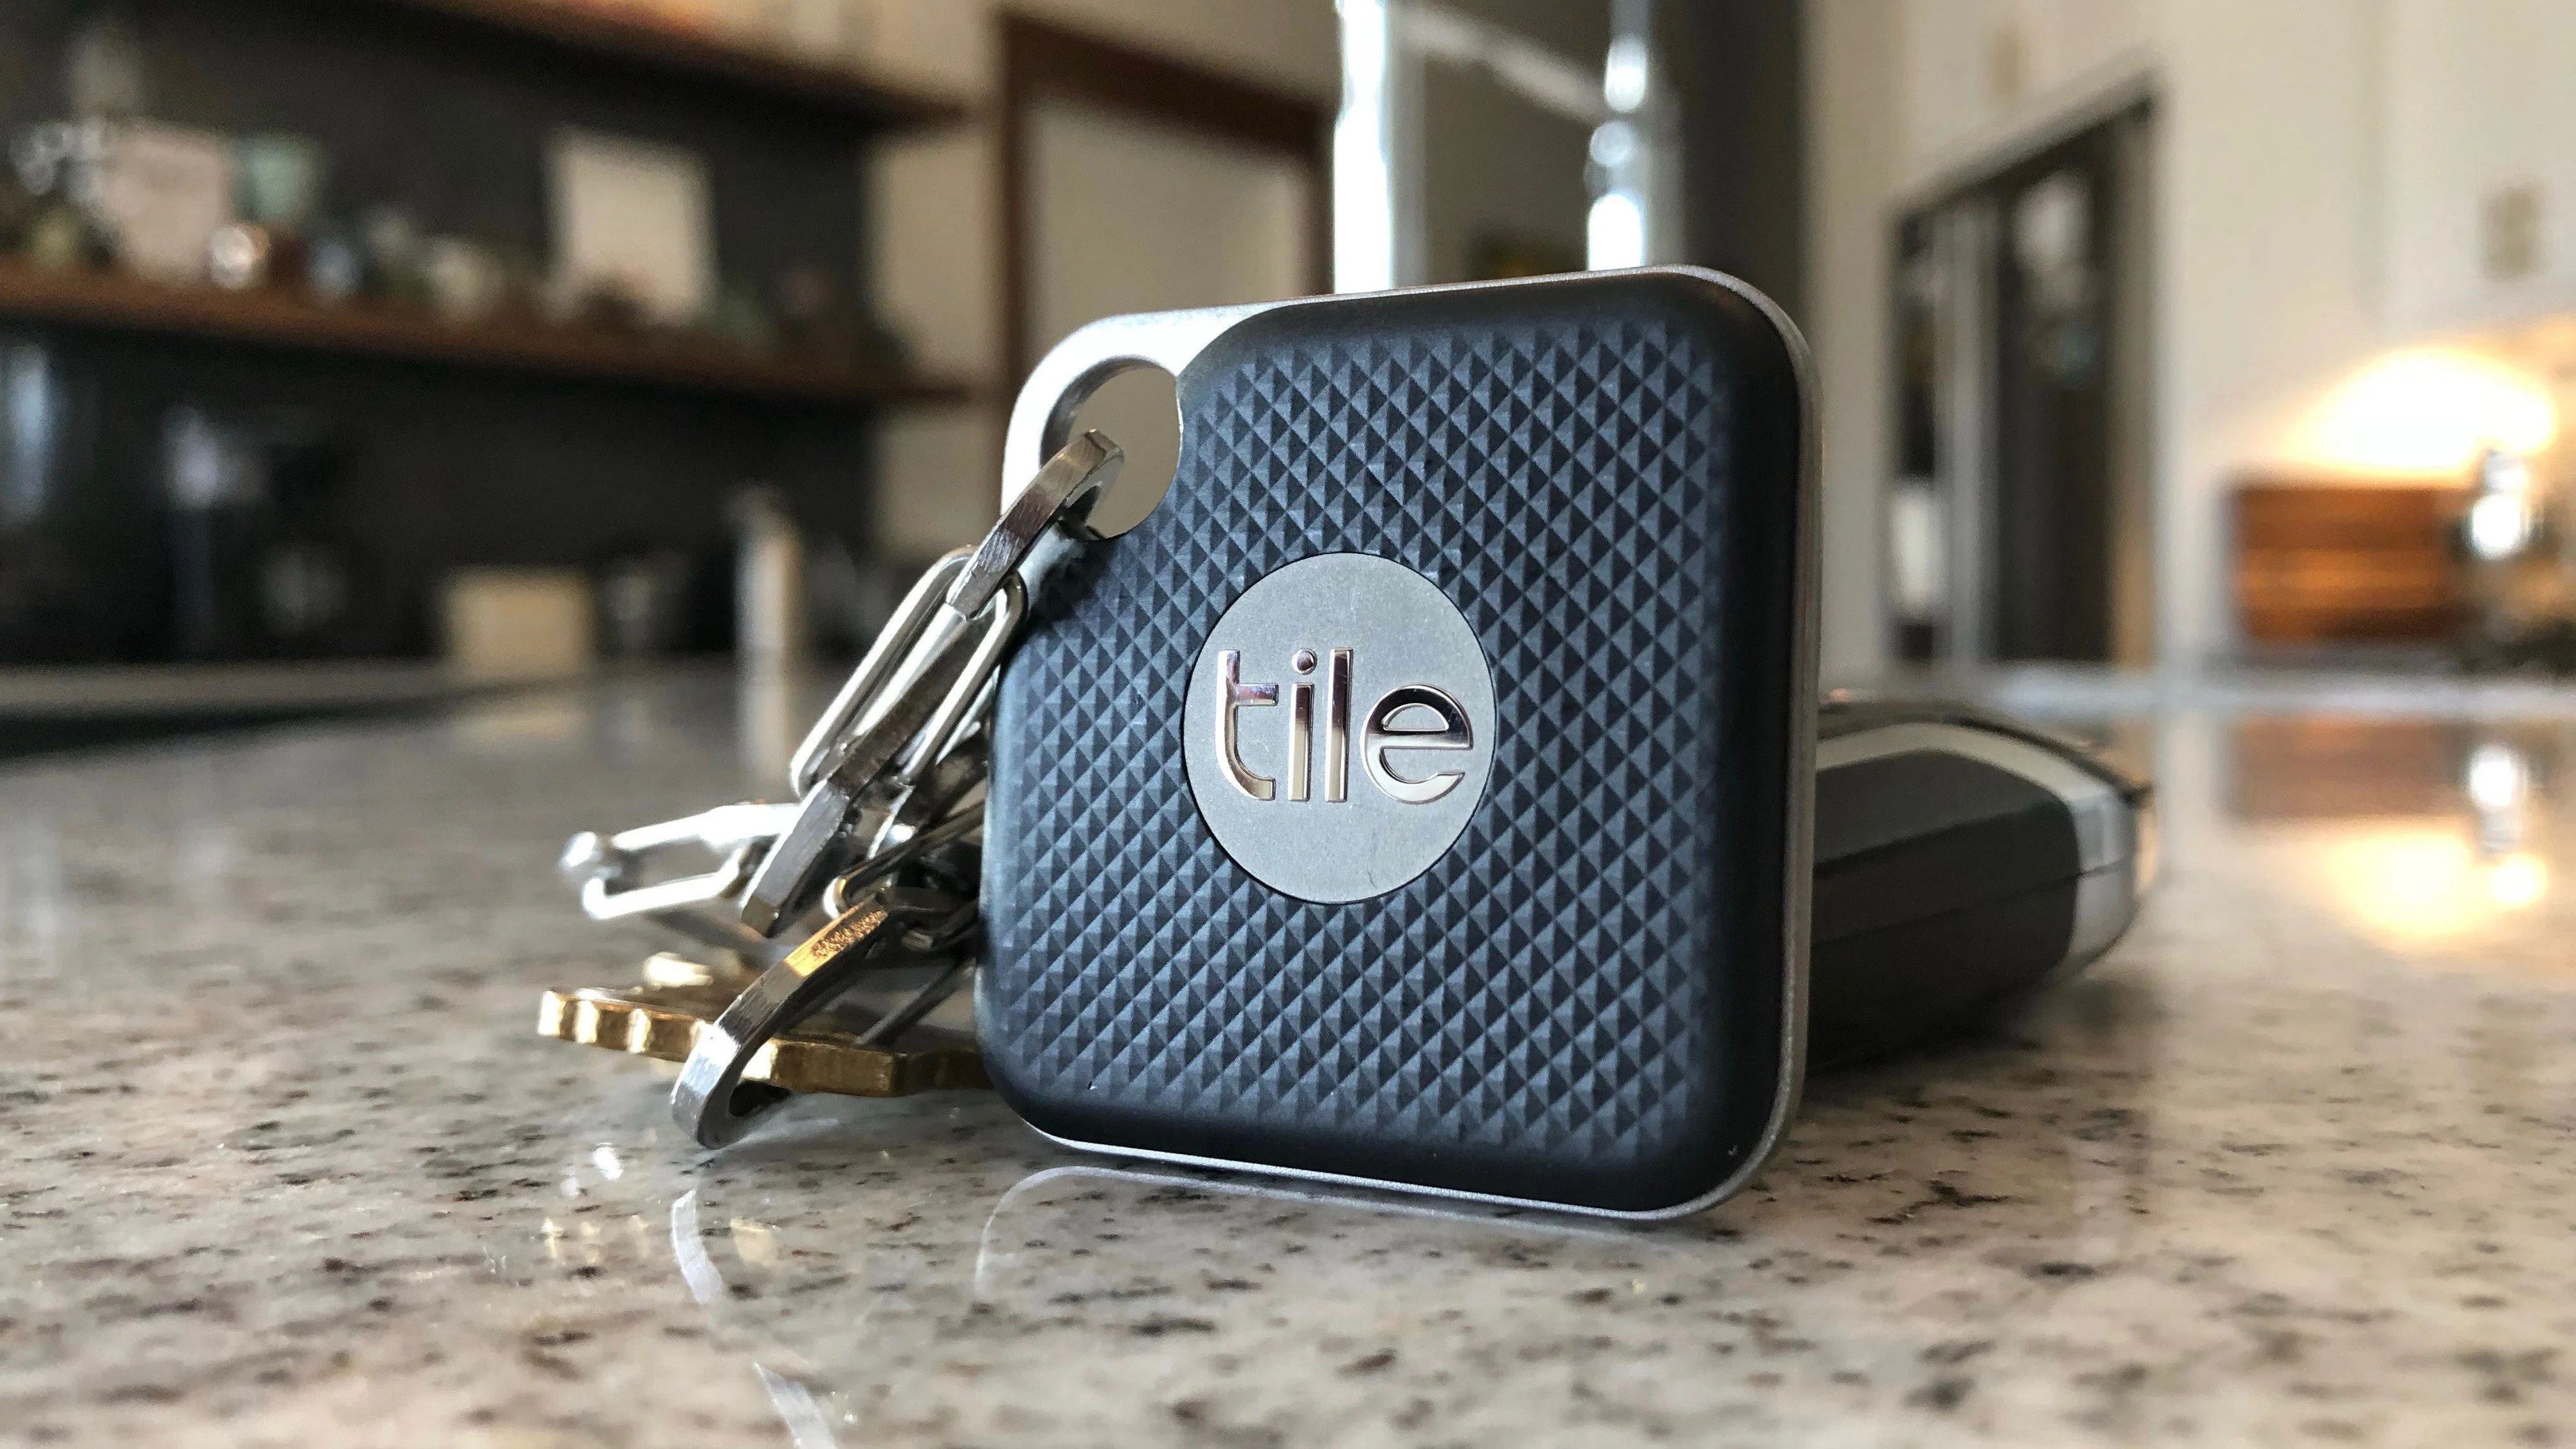 Tile is Already Worried About Getting lost After Apple Announces its item Tracker